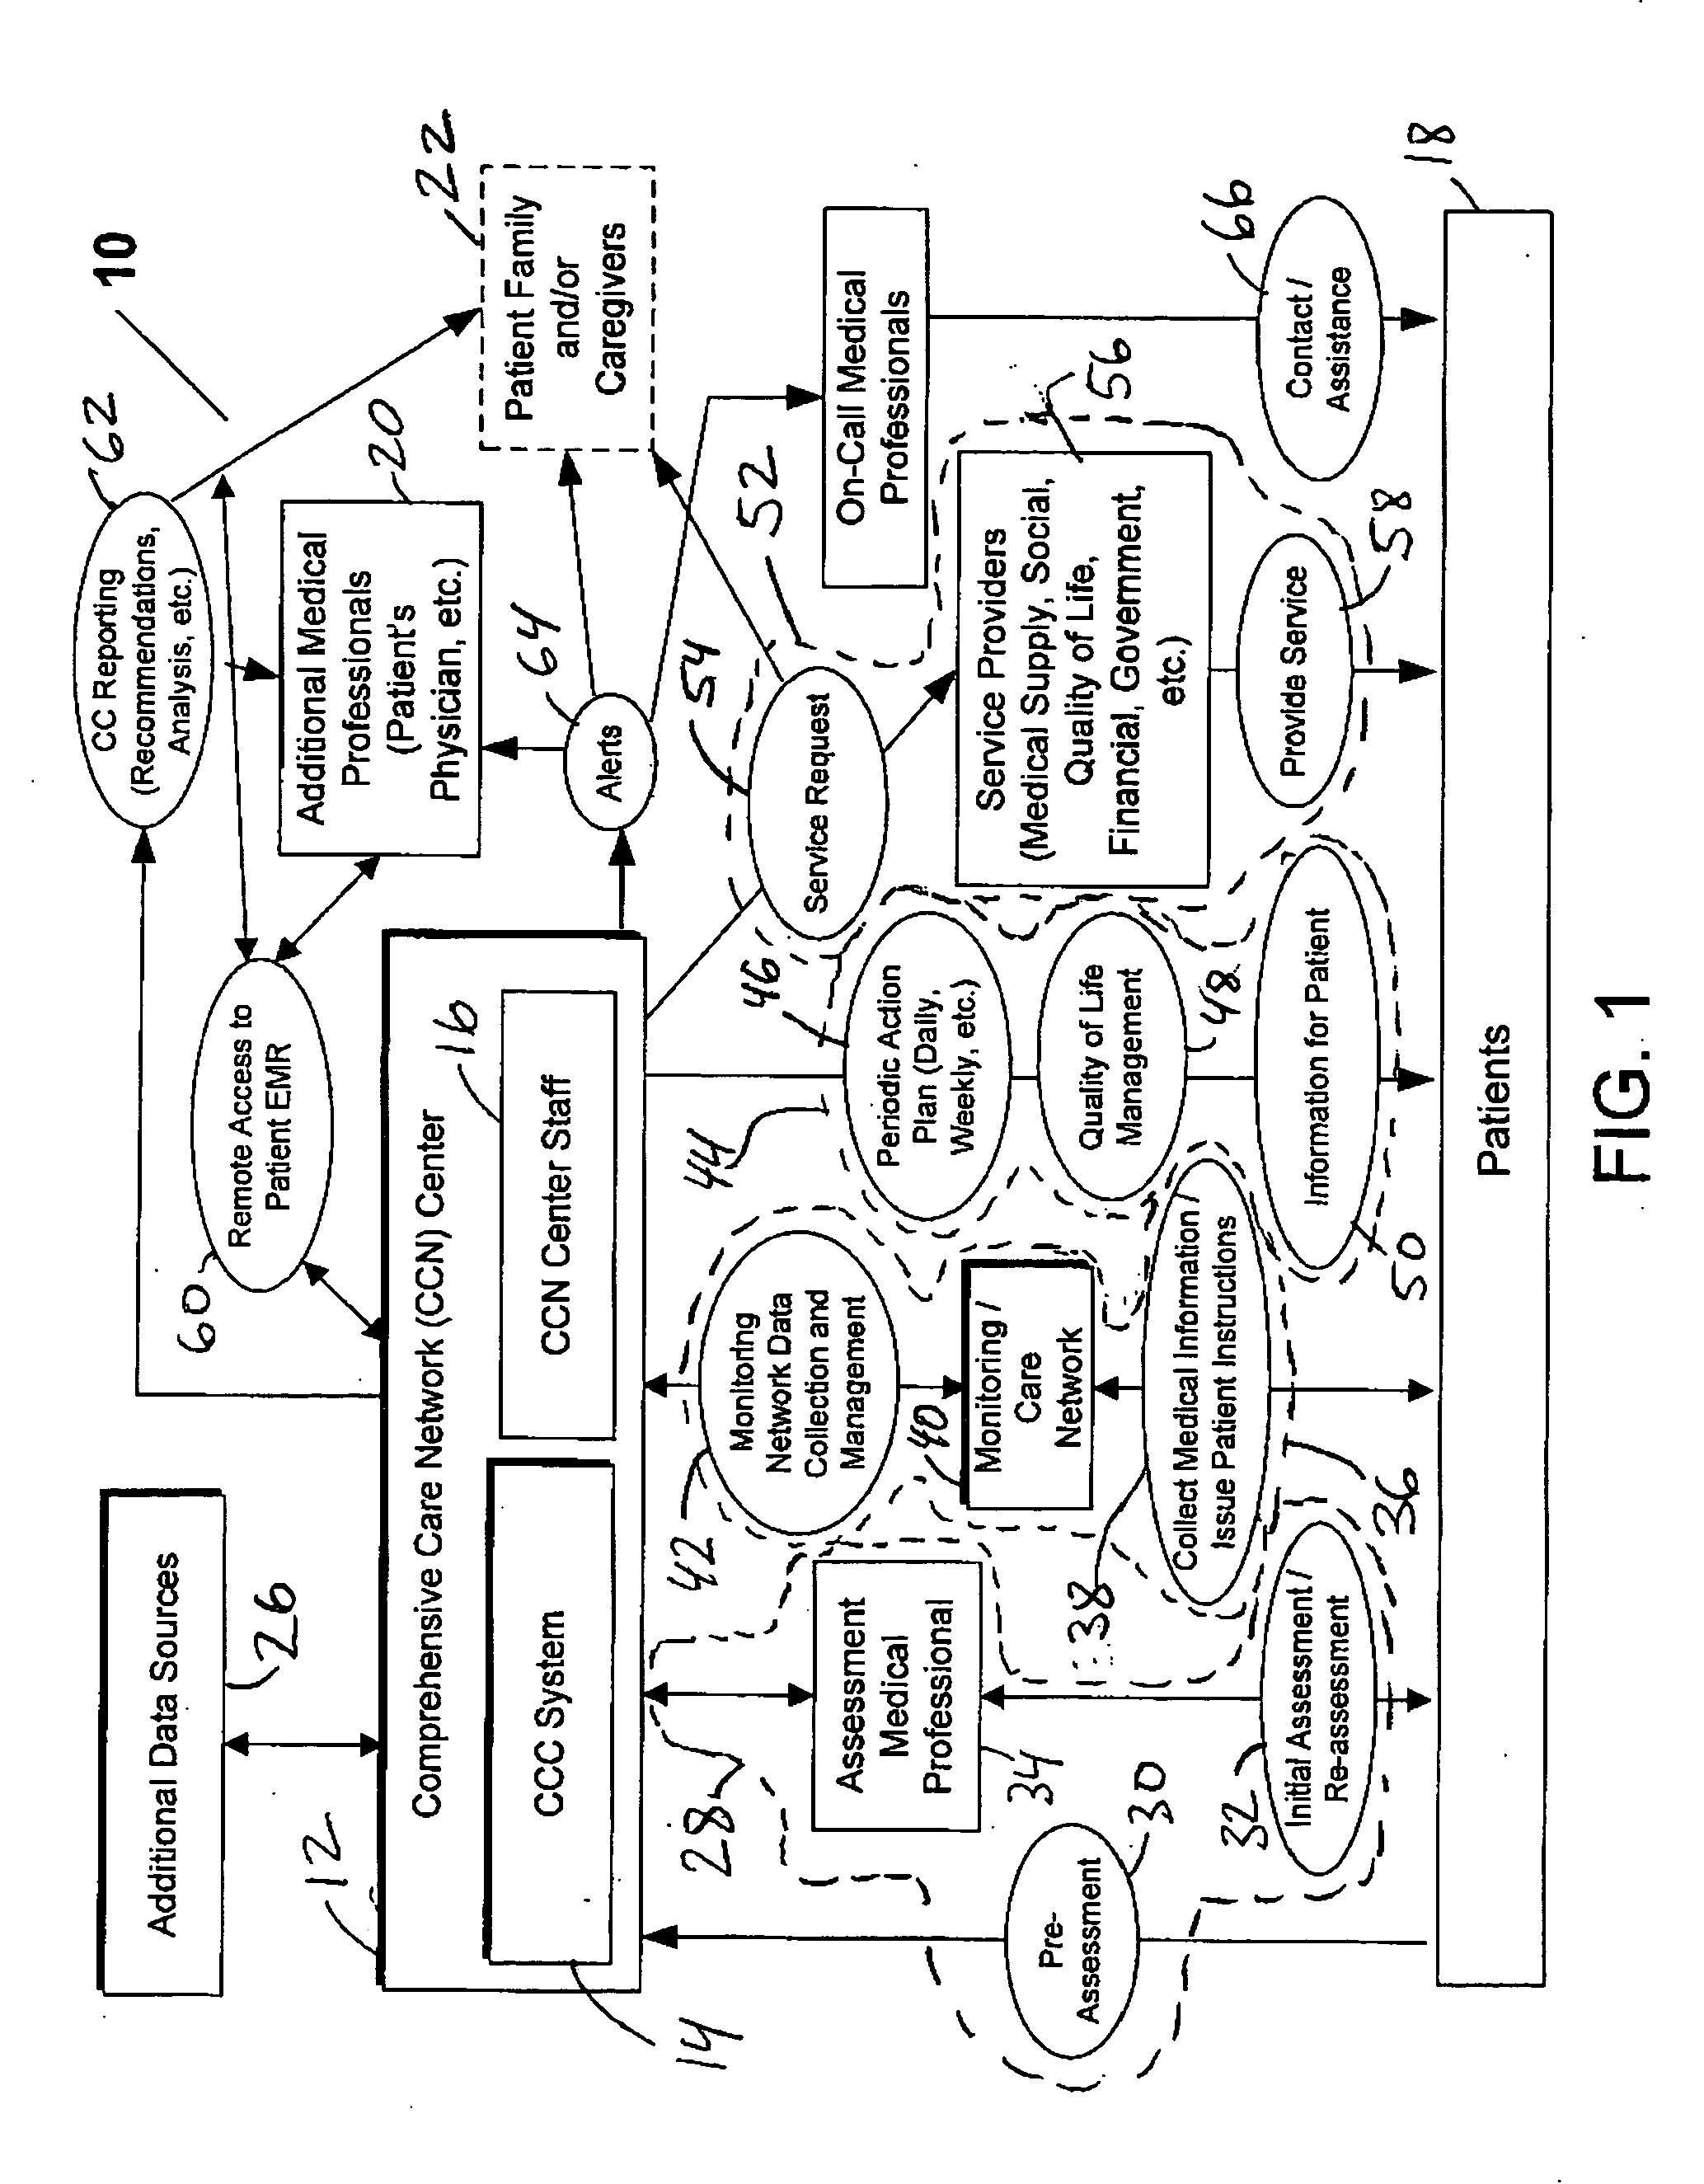 System and method for comprehensive remote patient monitoring and management